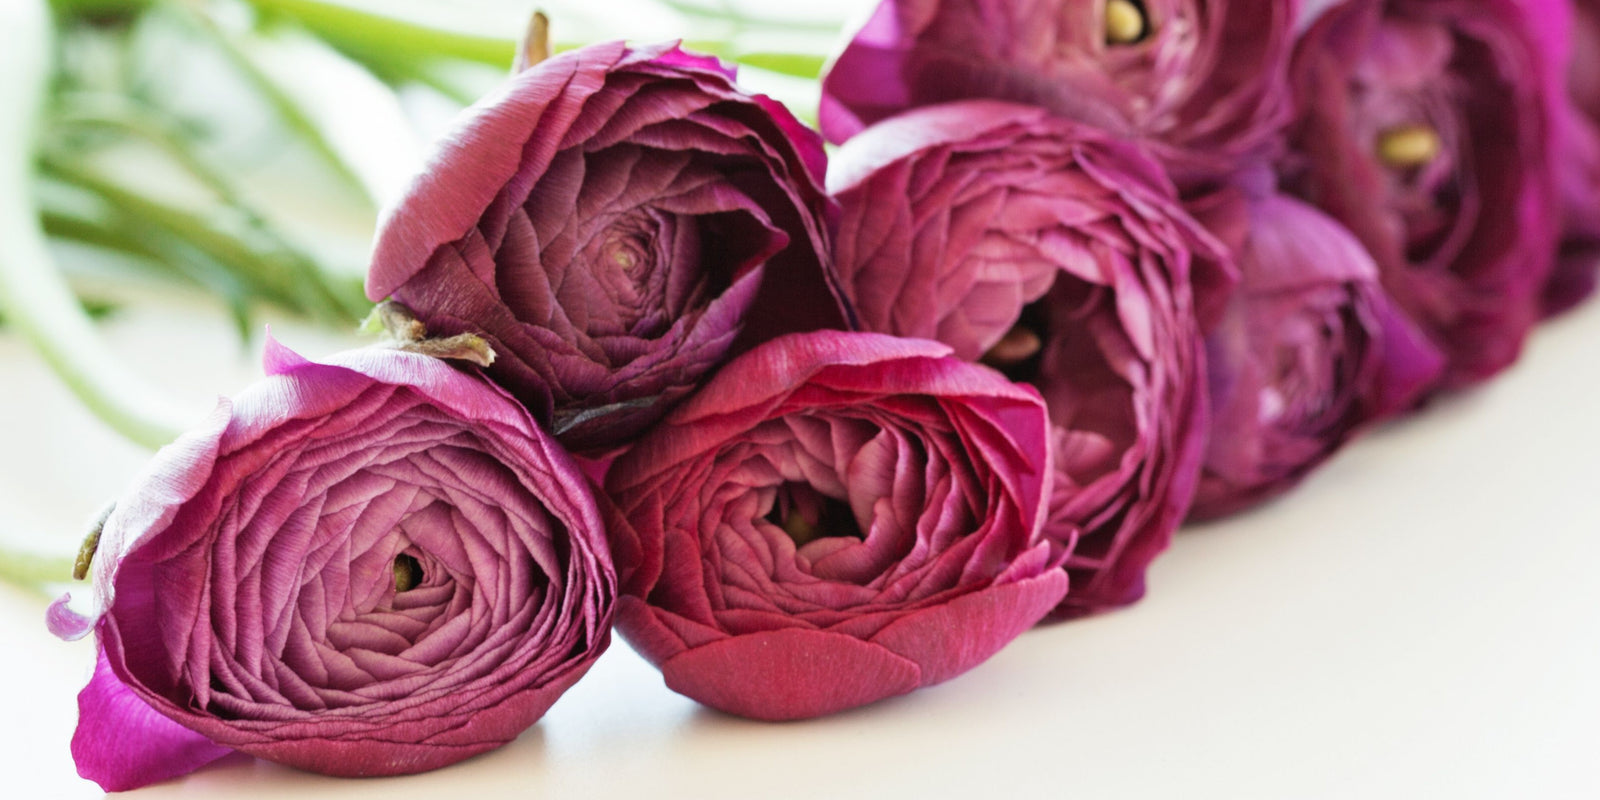 Also check out our Italian Ranunculus 